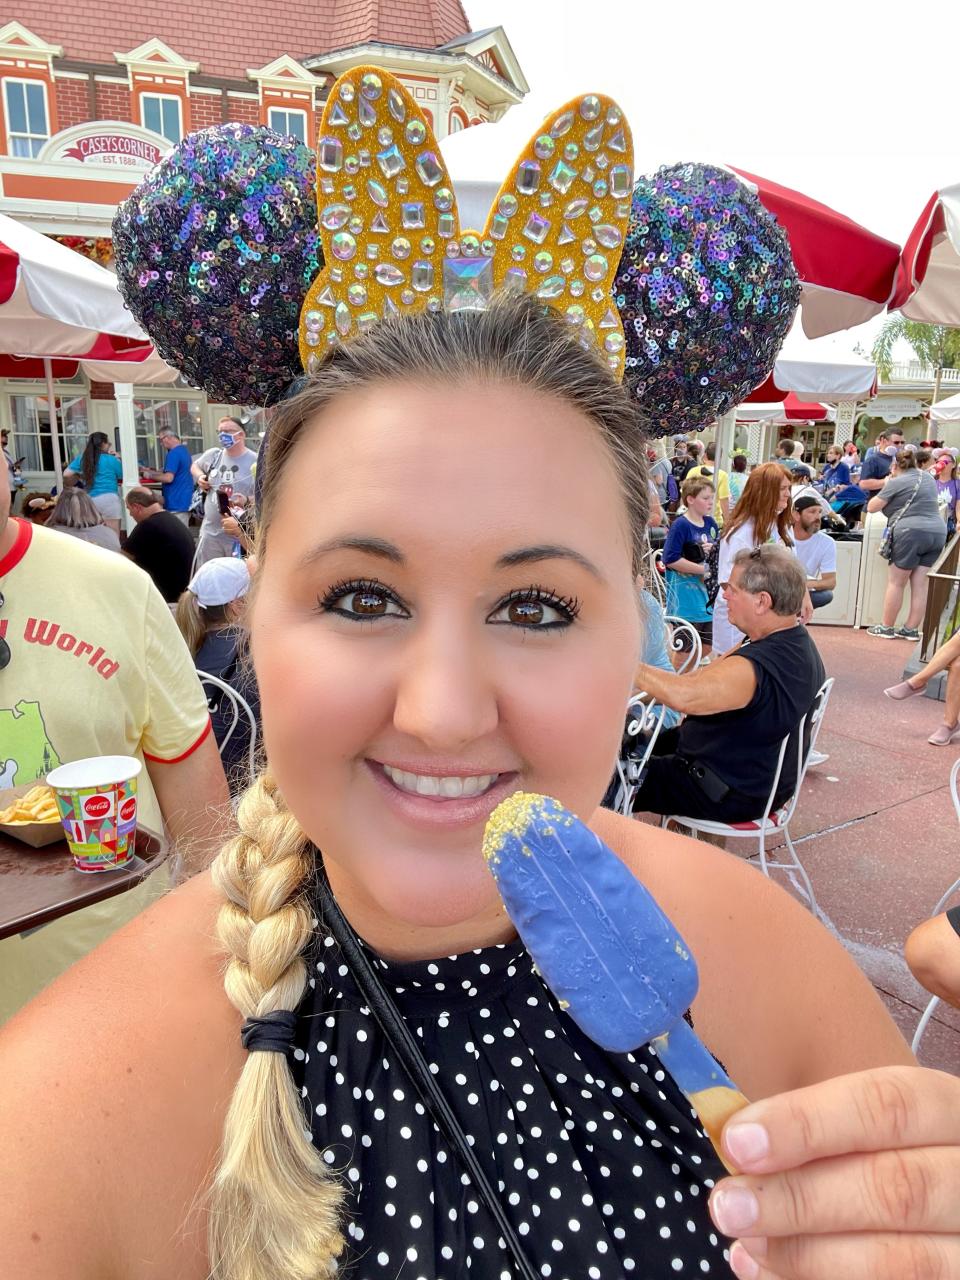 carly with food and ears in the new earidesent color at disney world 50th anniversary